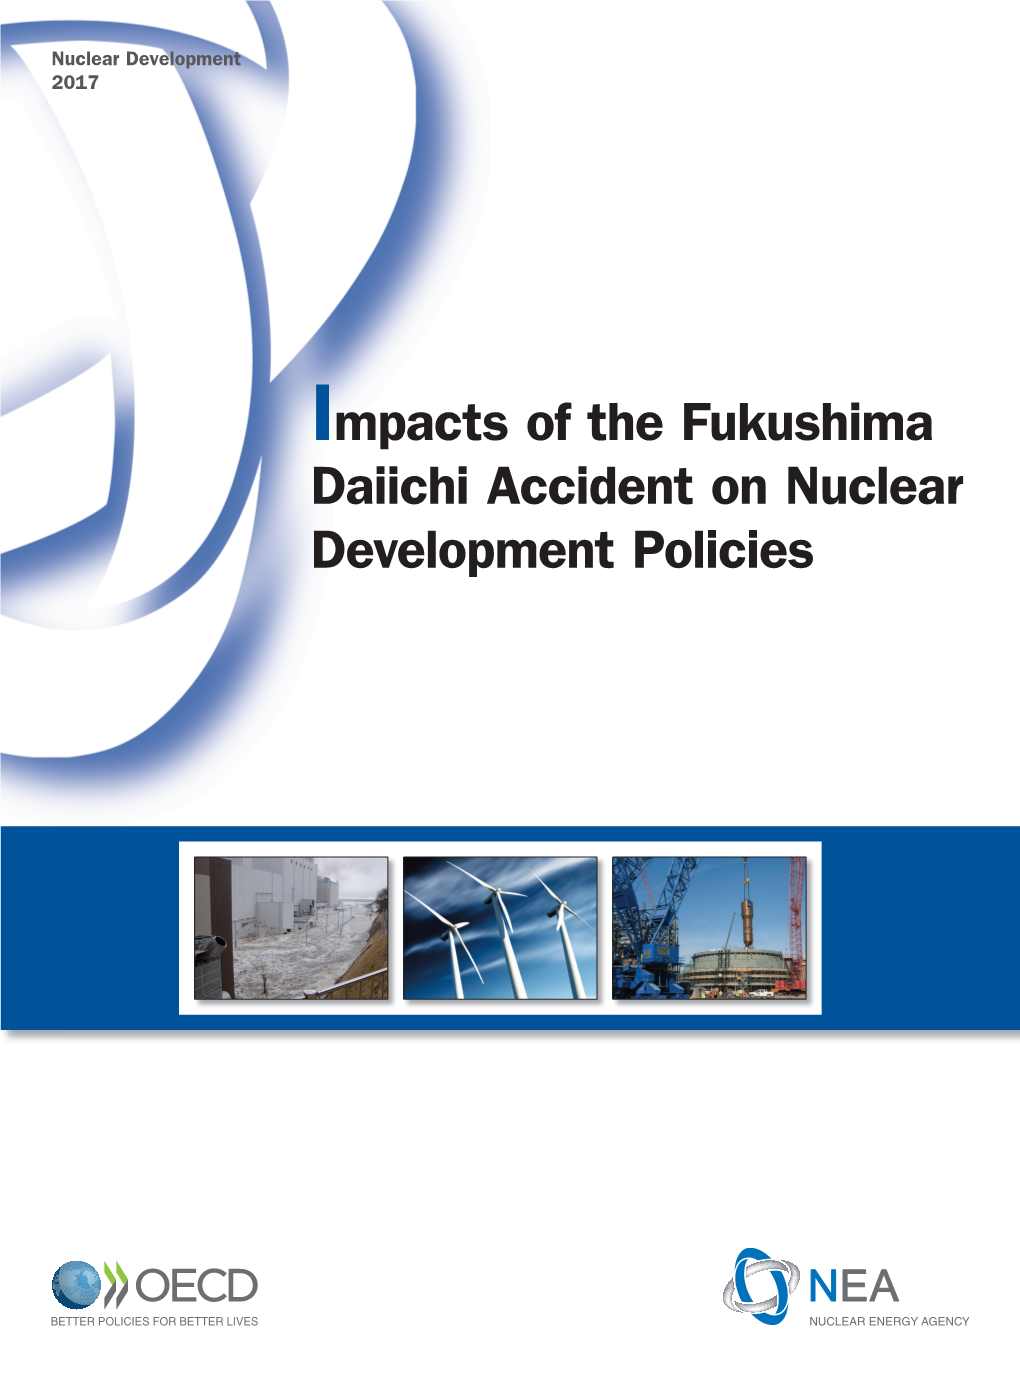 Impacts of the Fukushima Daiichi Accident on Nuclear Development Policies